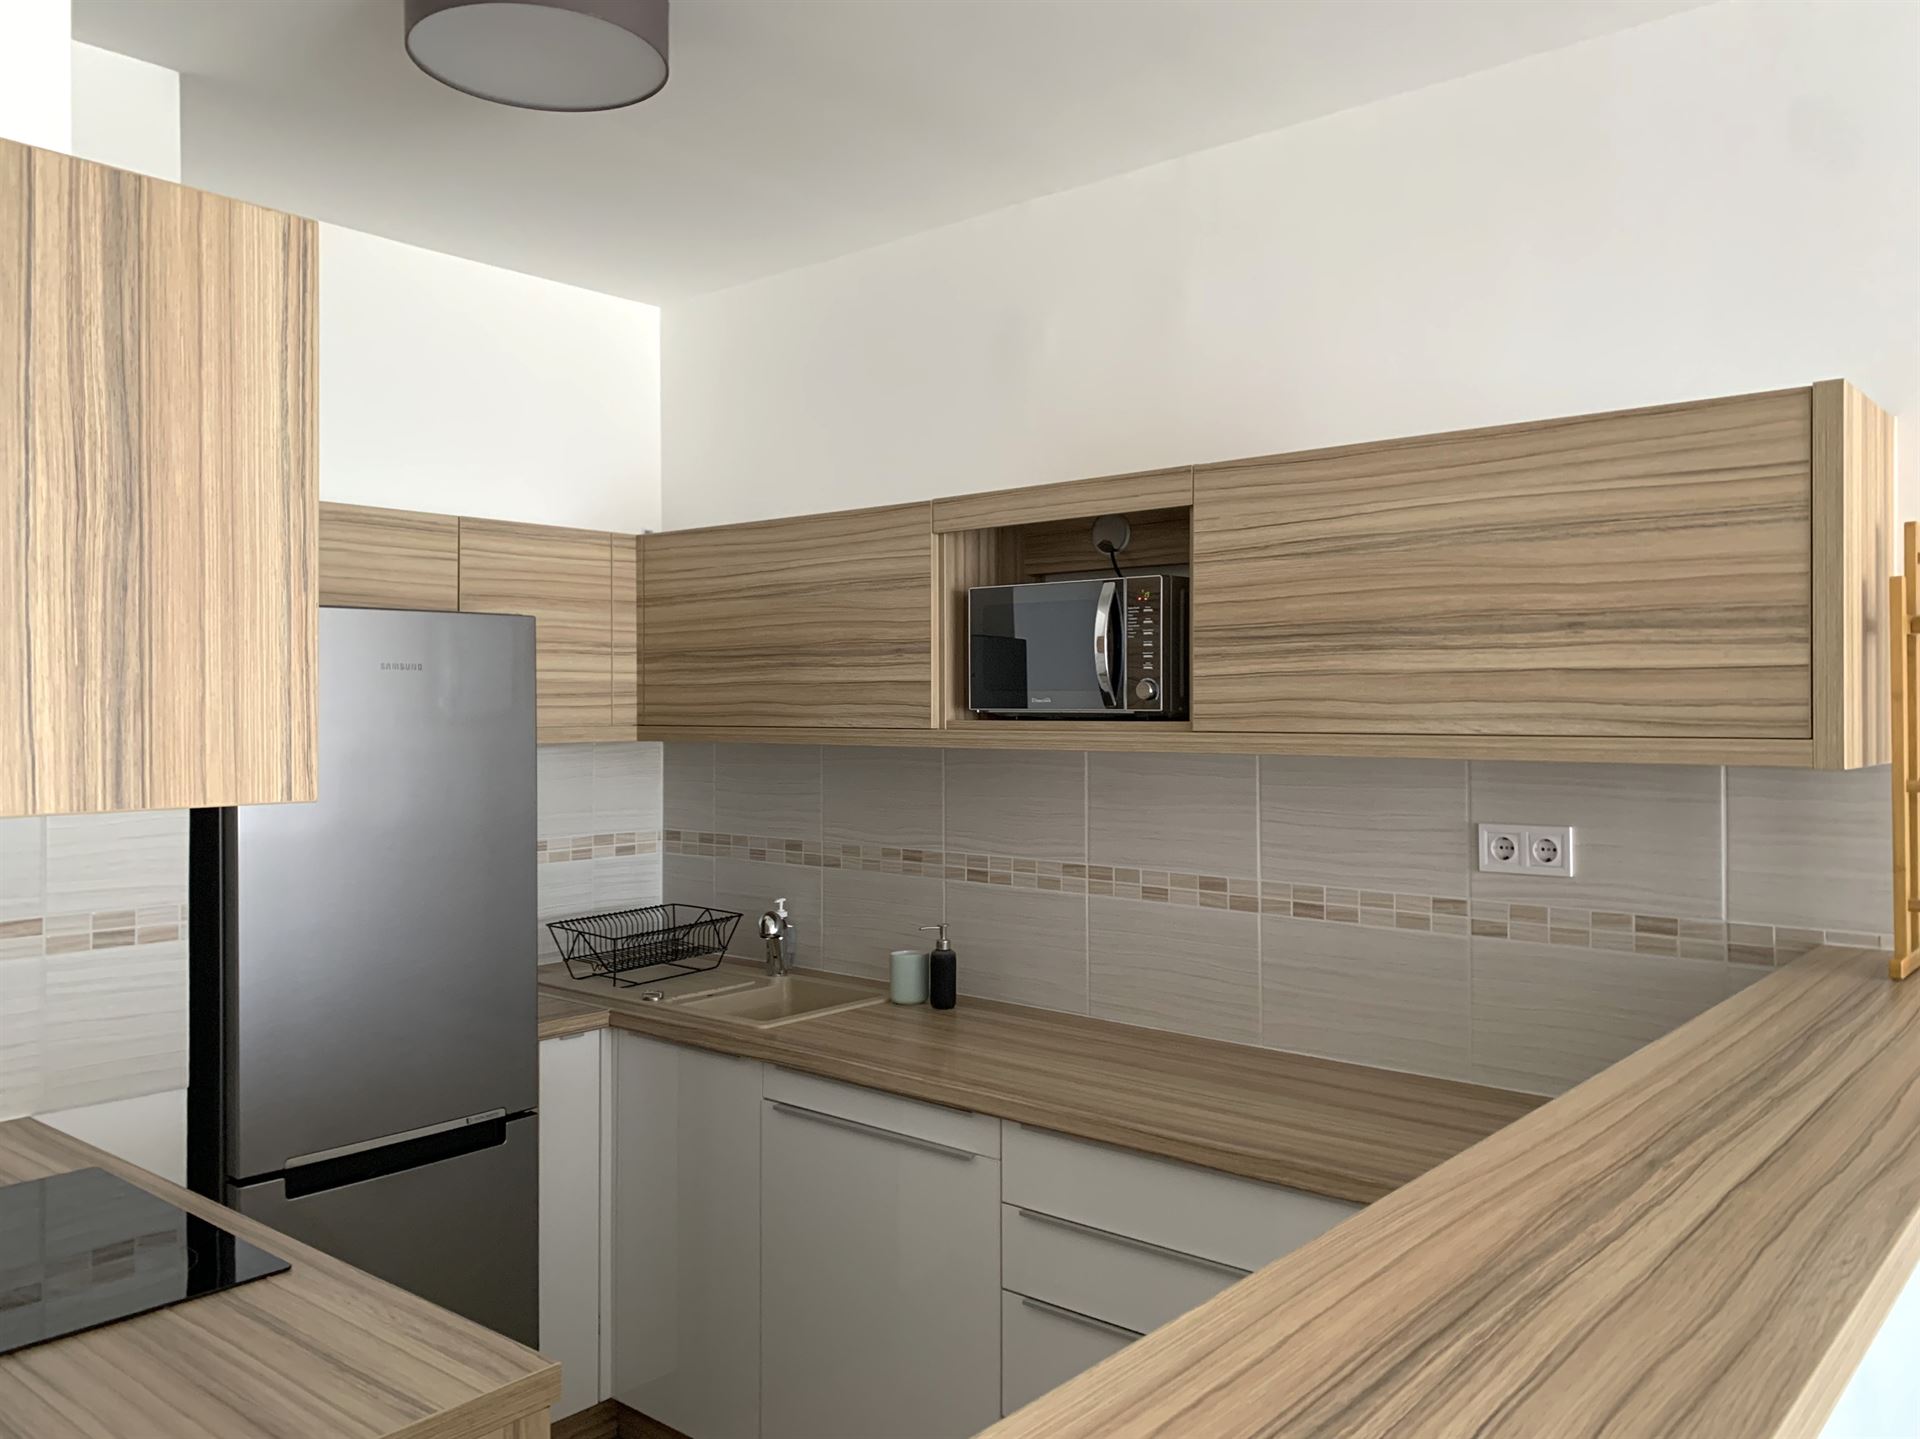 budapest-rental-long-term-property-for-rent-district-13-flat-for-rent-new-condo-rental10